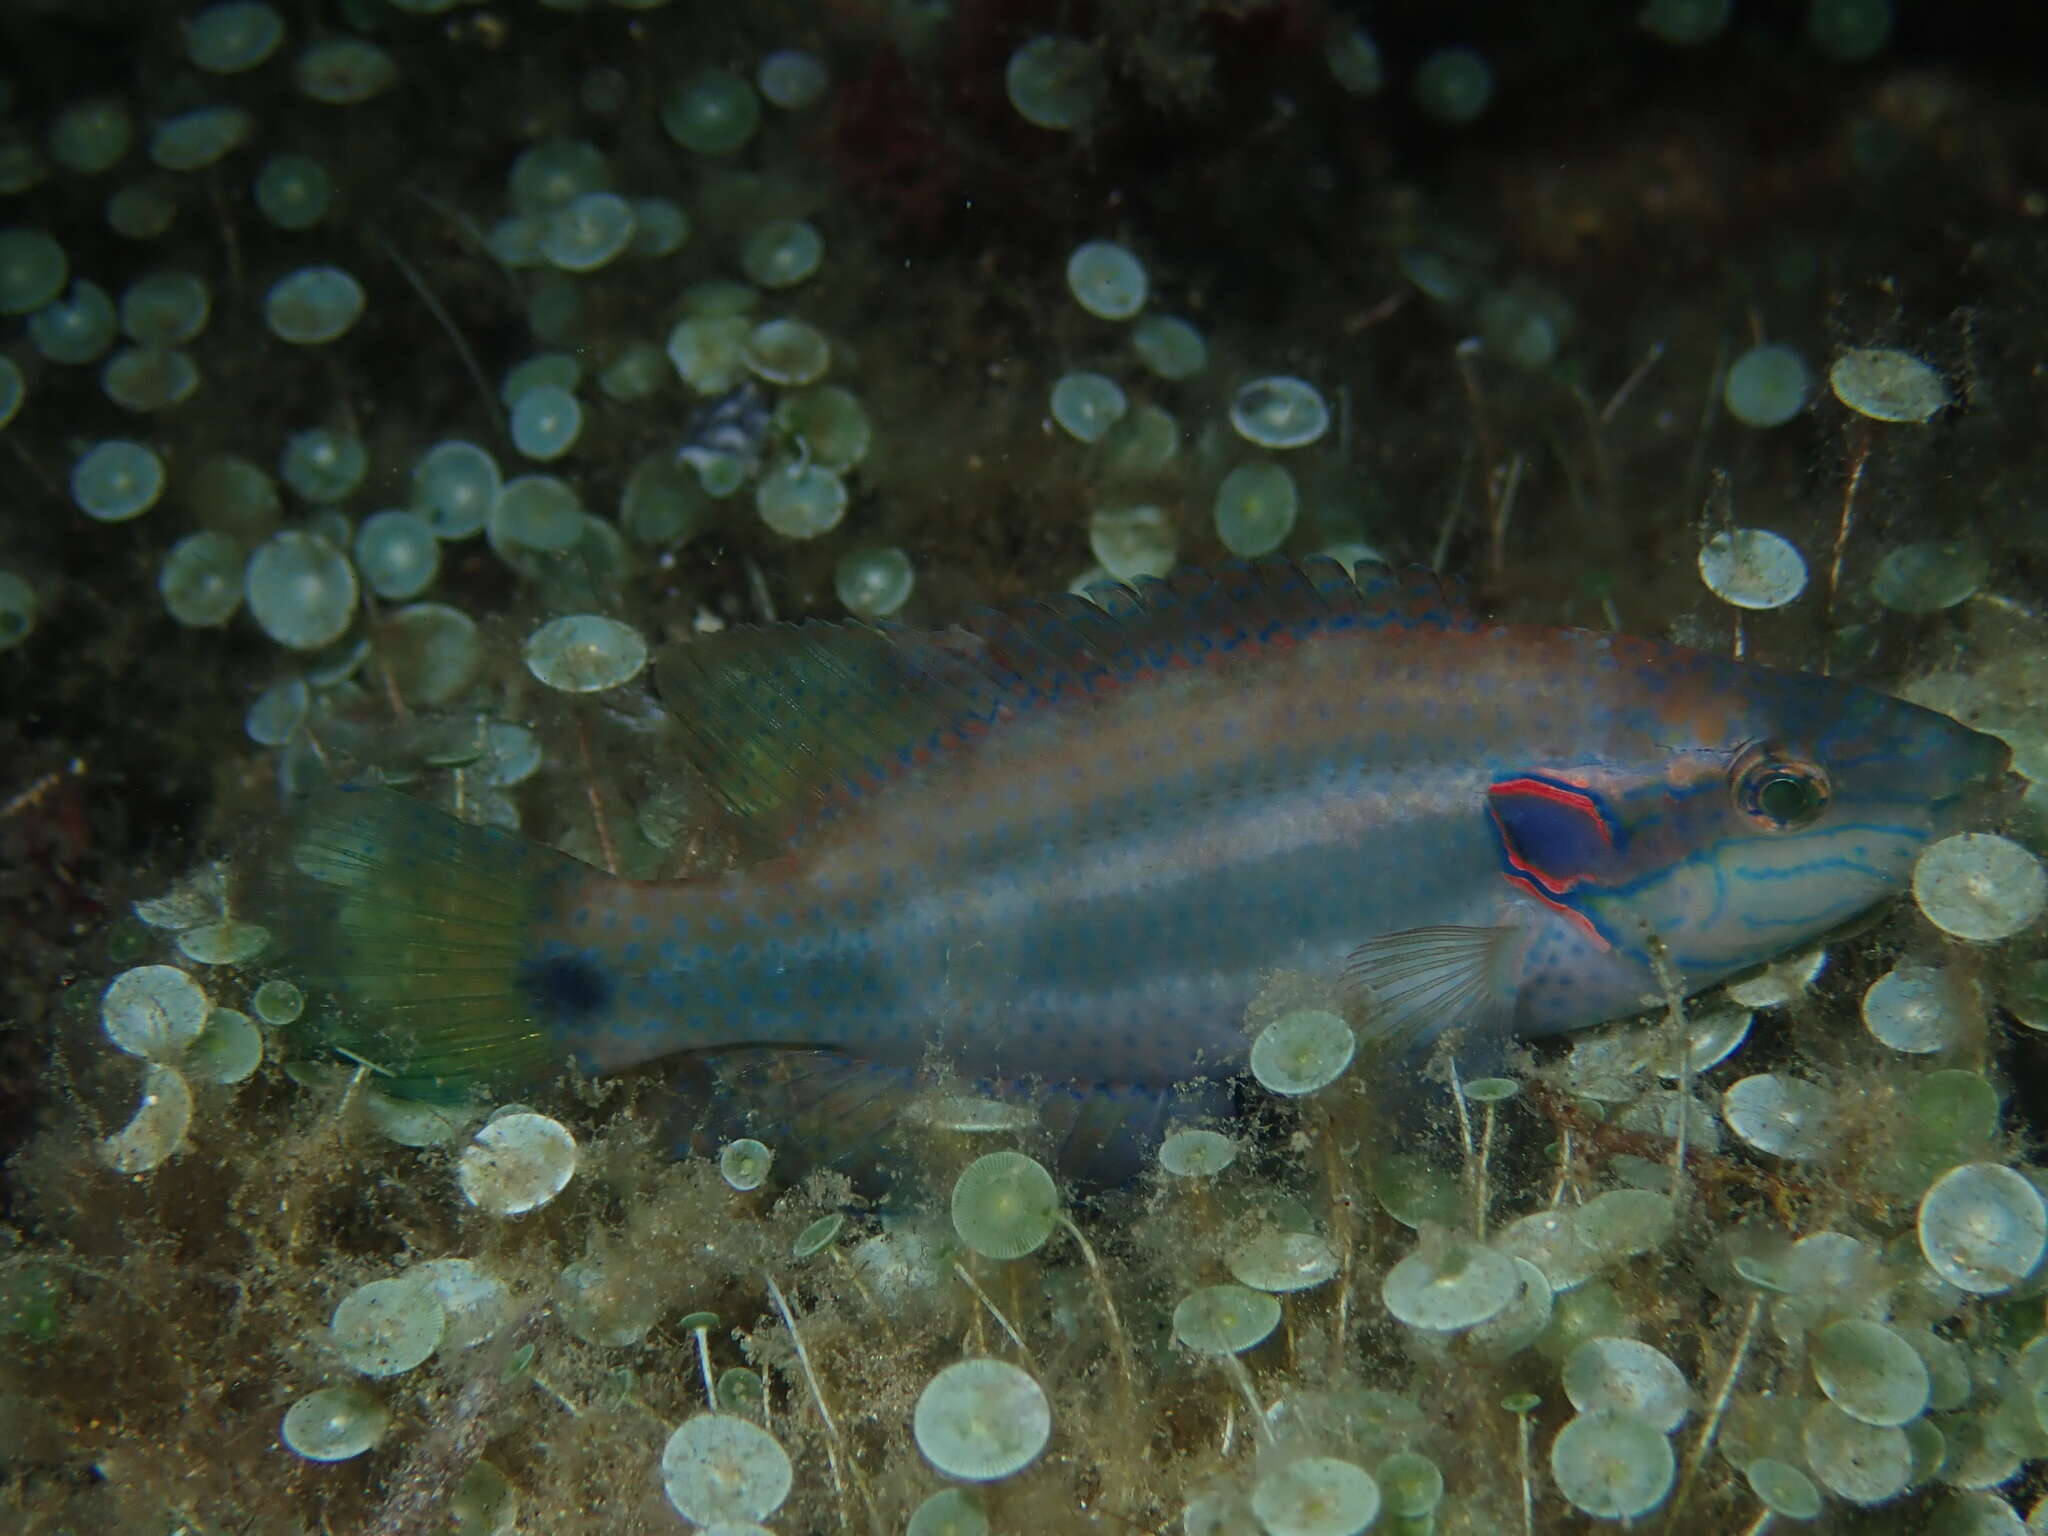 Image of Ocellated Wrasse